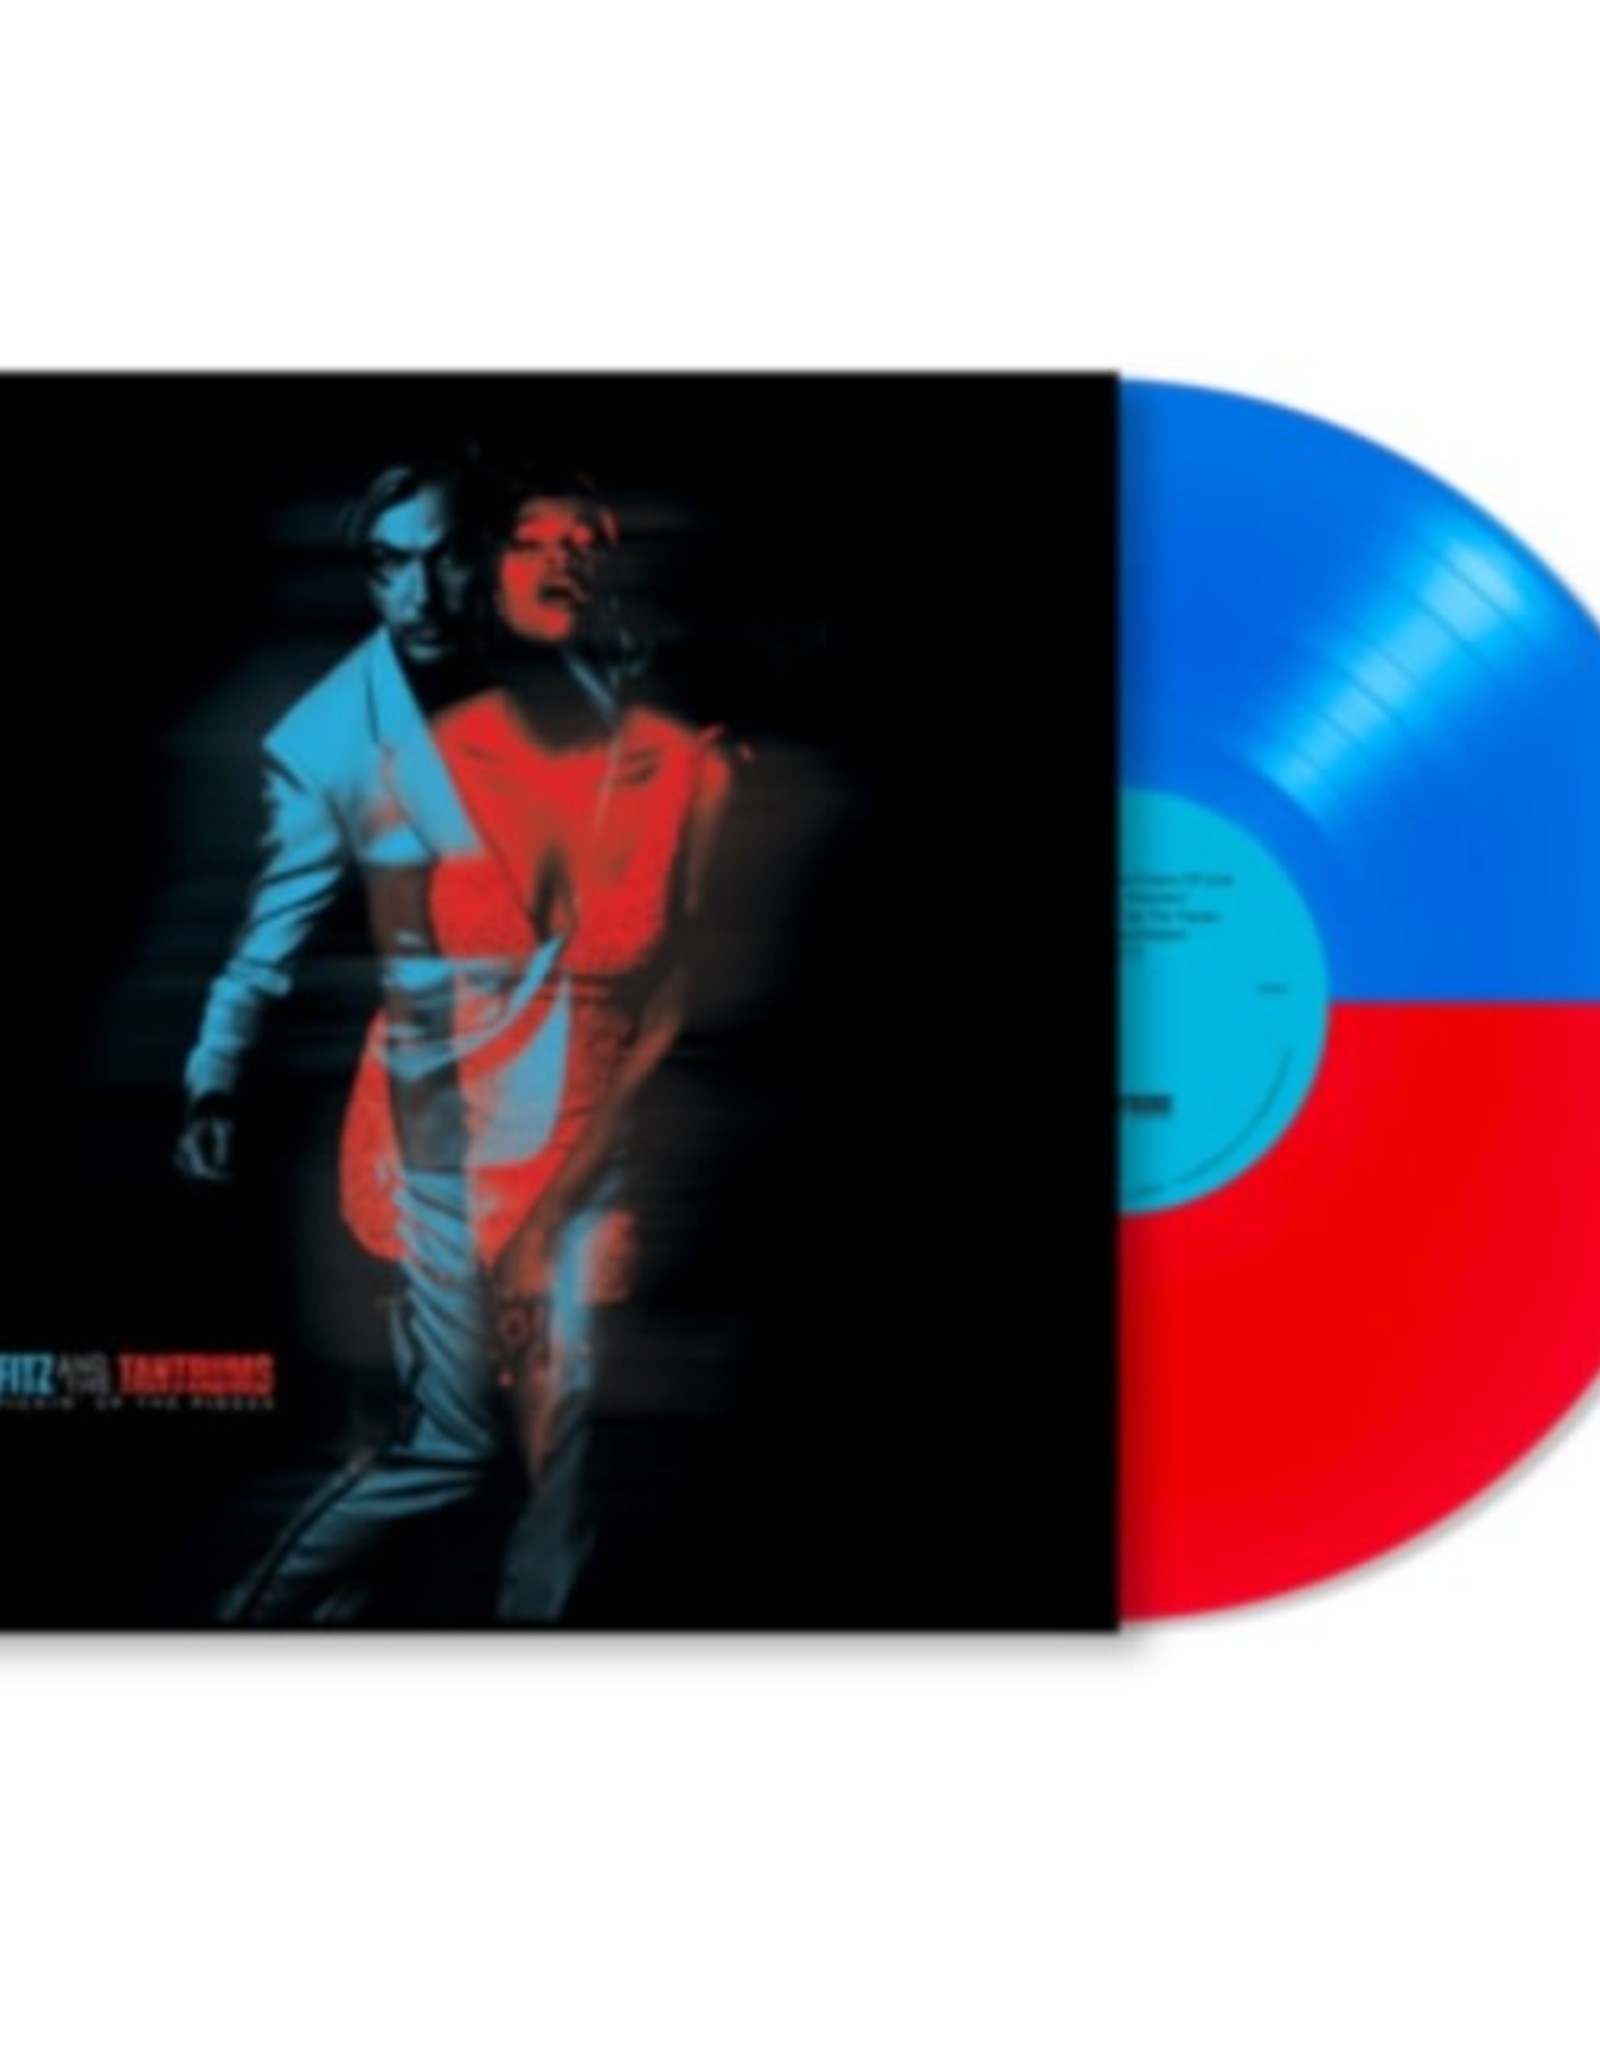 Fitz and the Tantrums - Pickin' Up The Pieces (Colored Vinyl, Red, Blue, Indie Exclusive)